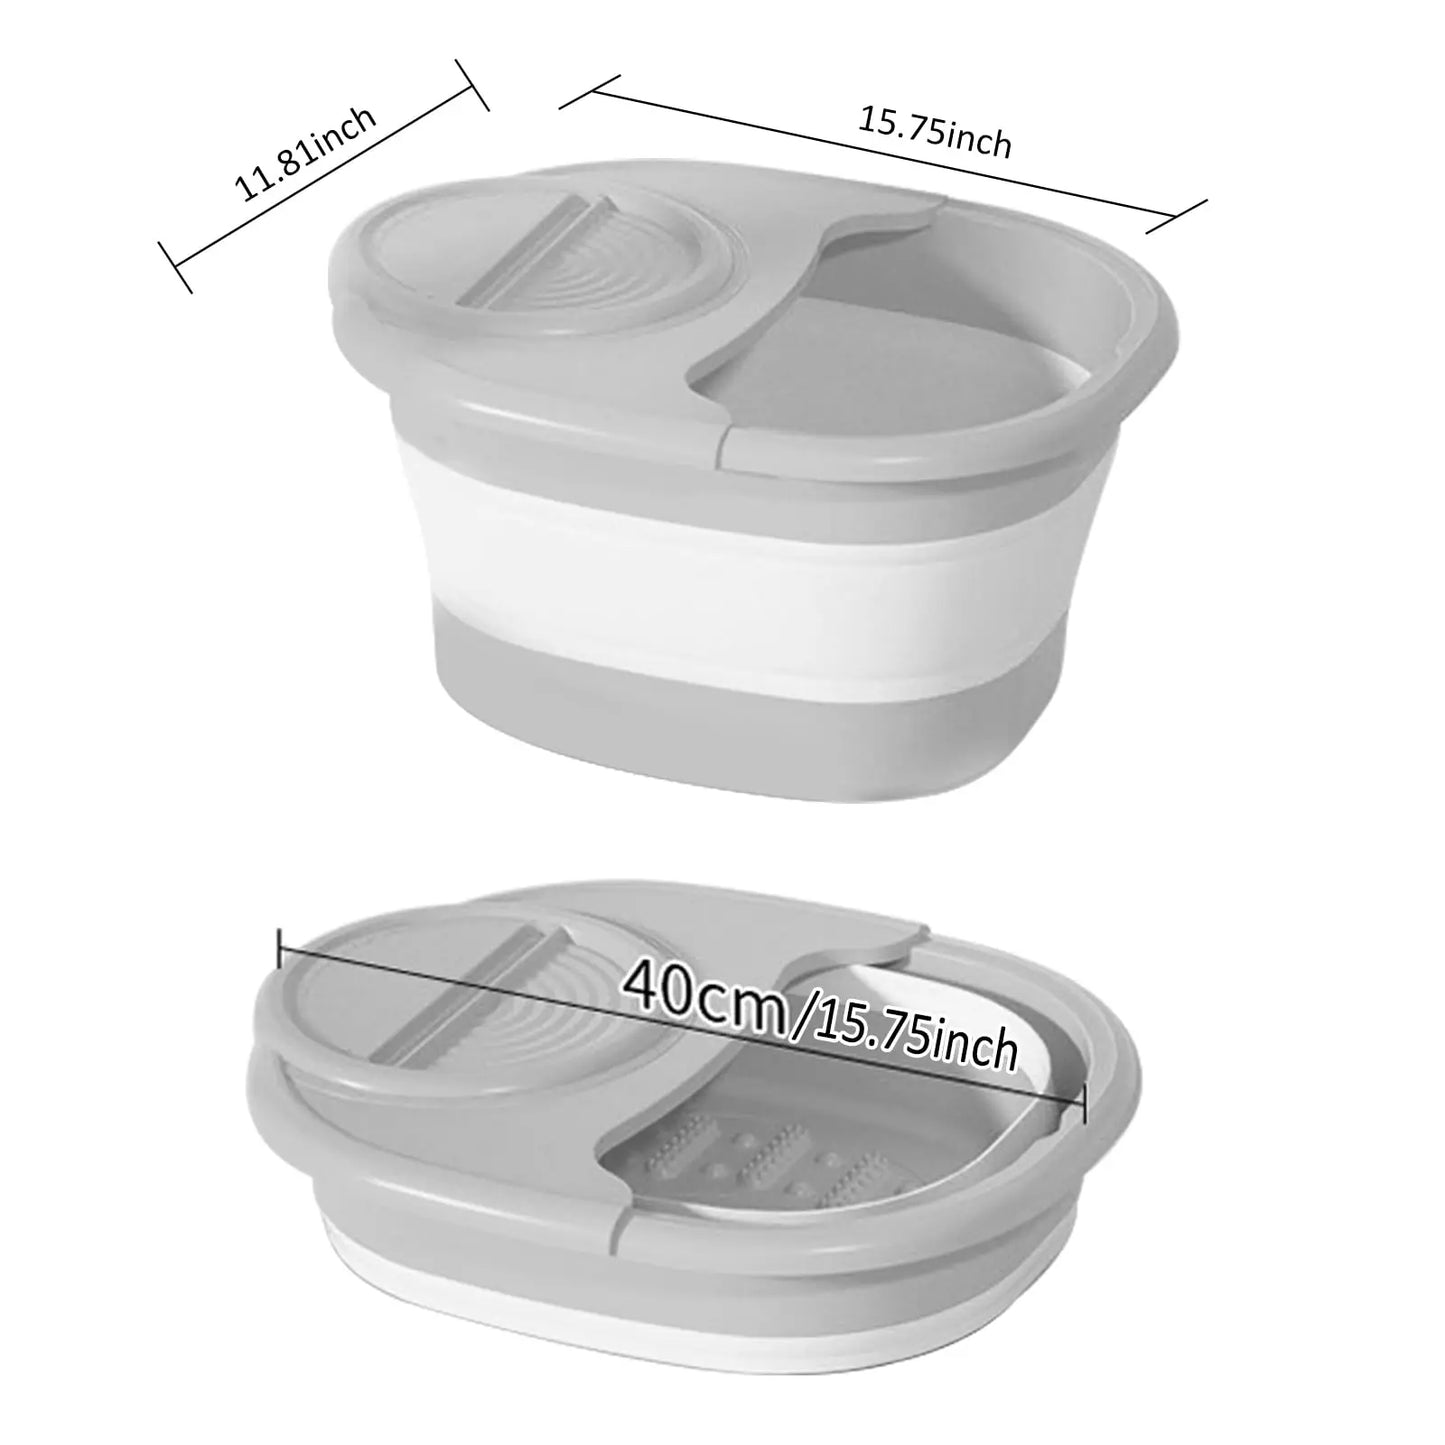 Portable Foldable Foot Bath Bucket - Relax and Heal Your Feet